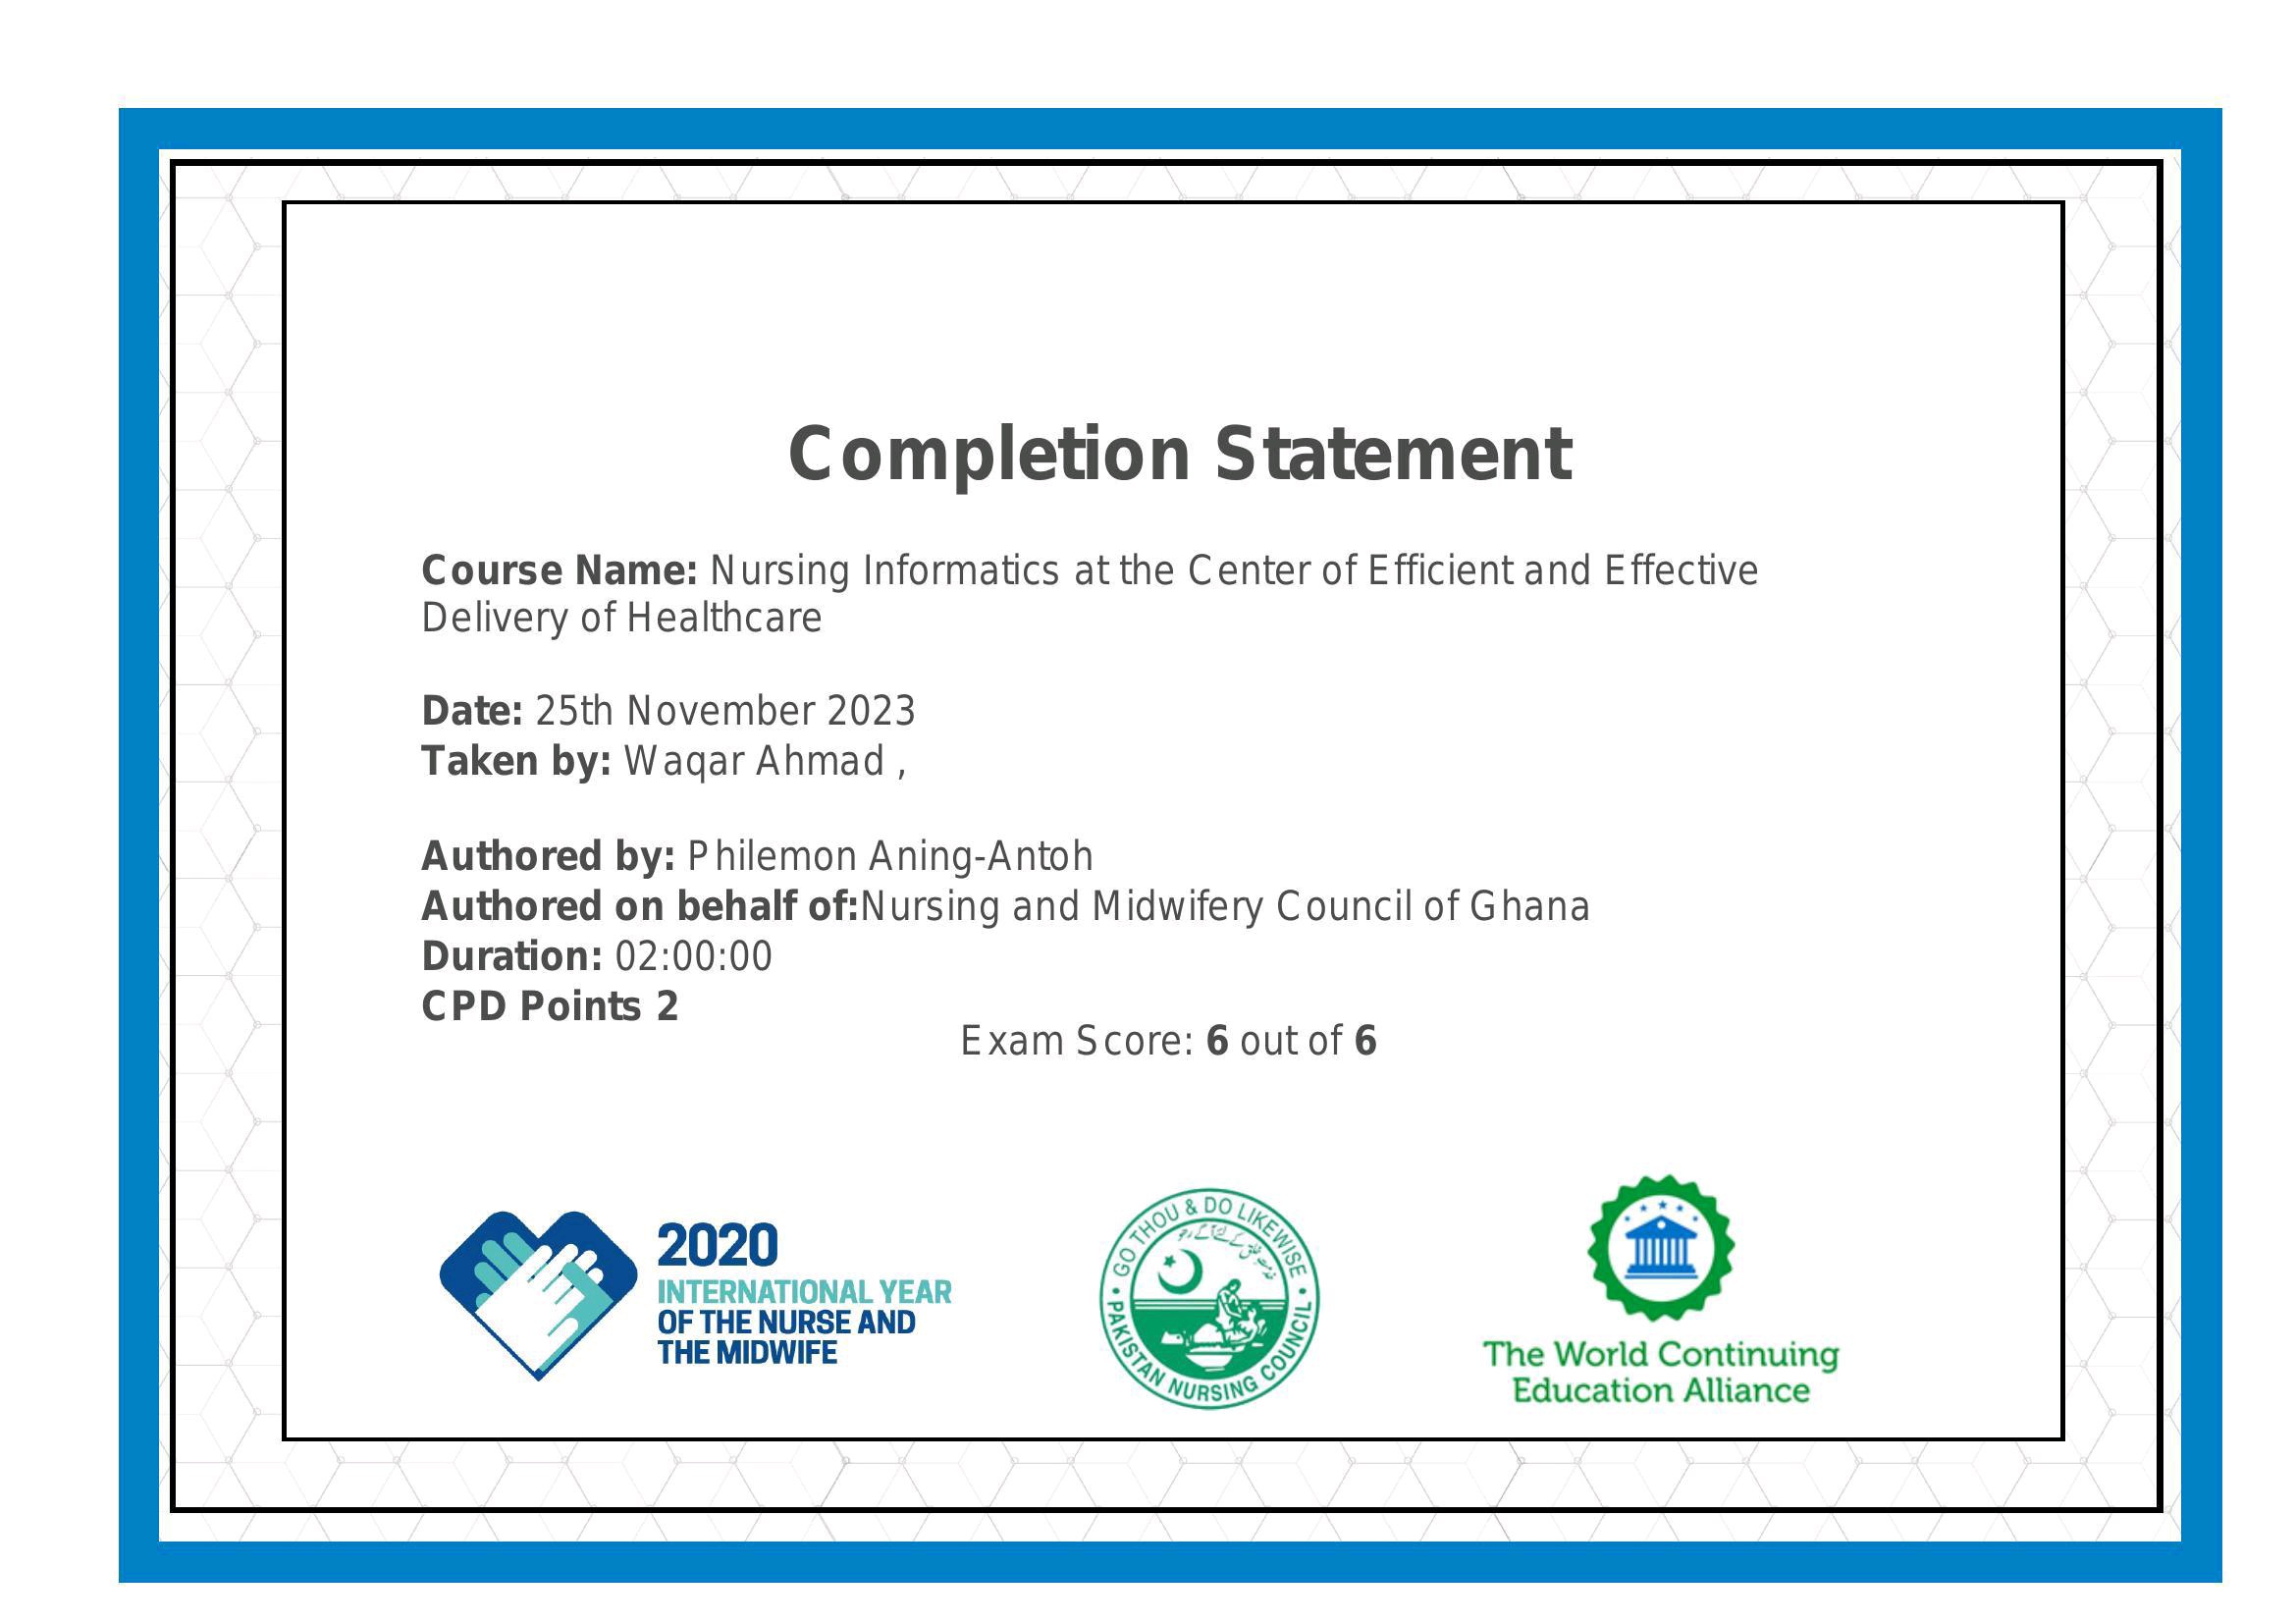 Completion Statement

Course Name: Nursing Informatics at the Center of Efficient and Effective
Delivery of Healthcare

Date: 25th November 2023
Taken by: Wagar Ahmad ,

Authored by: Philemon Aning-Antoh
Authored on behalf of:Nursing and Midwifery Council of Ghana
Duration: 02:00:00

CPD Points 2
Exam Score: 6 out of 6

INTERNATIONAL YEAR :

OF THE NURSE AND Ry

THE MIDWIFE : The World Continuing
Education Alliance